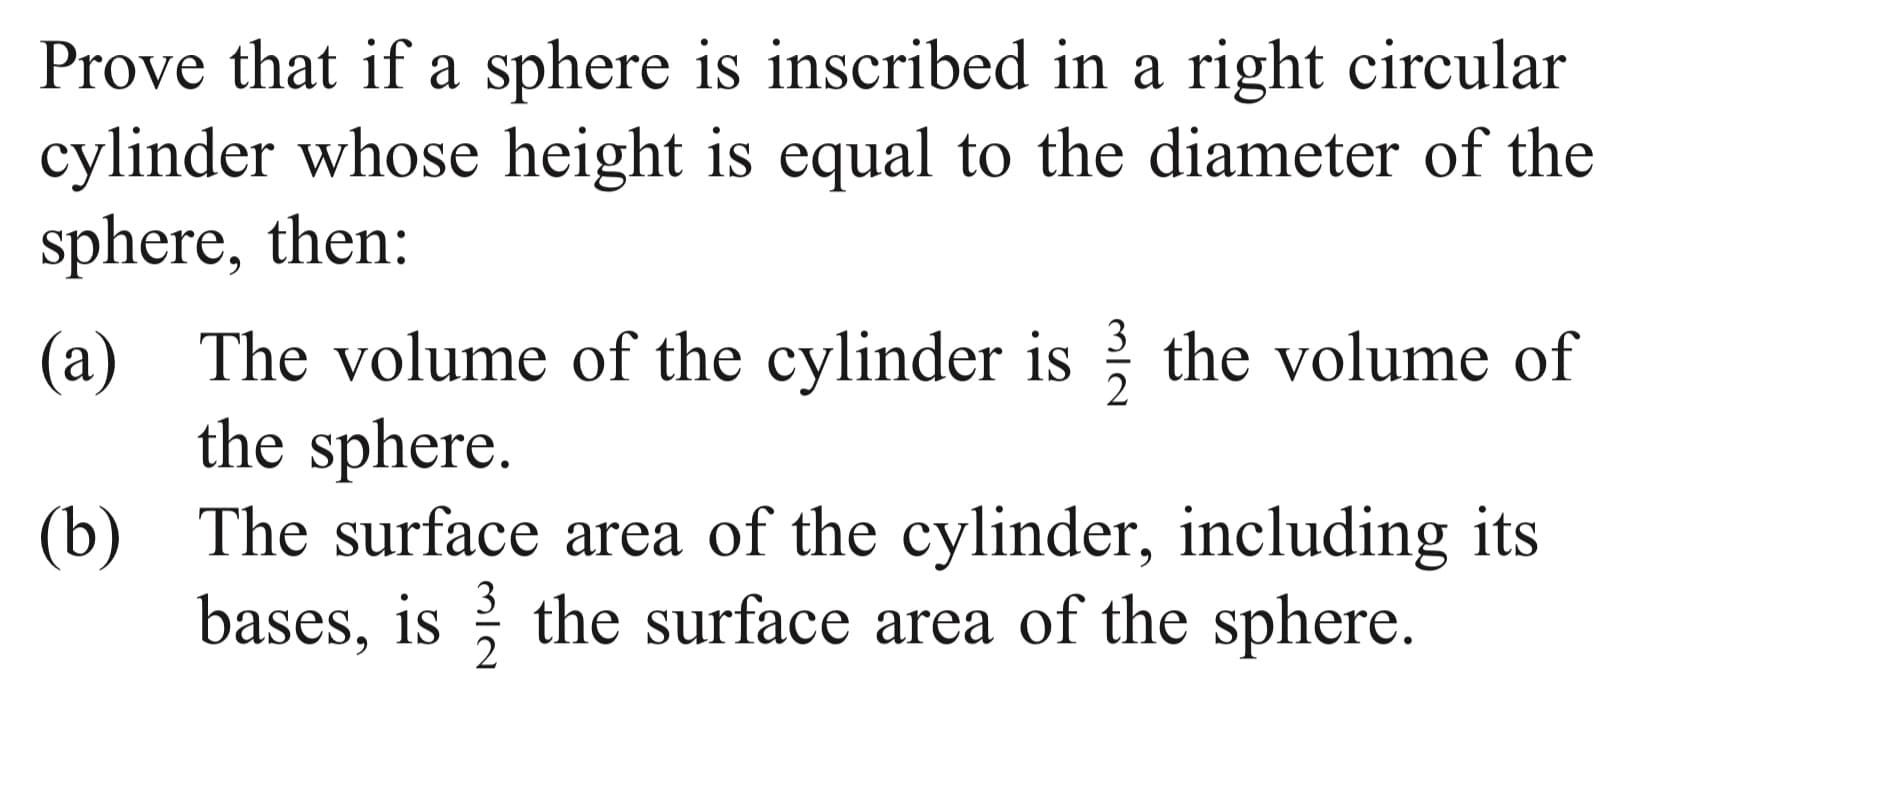 Prove that if a sphere is inscribed in a right circular
cylinder whose height is equal to the diameter of the
sphere, then:
3
(a) The volume of the cylinder is the volume of
the sphere.
(b) The surface area of the cylinder, including its
bases, is the surface area of the sphere.
3
